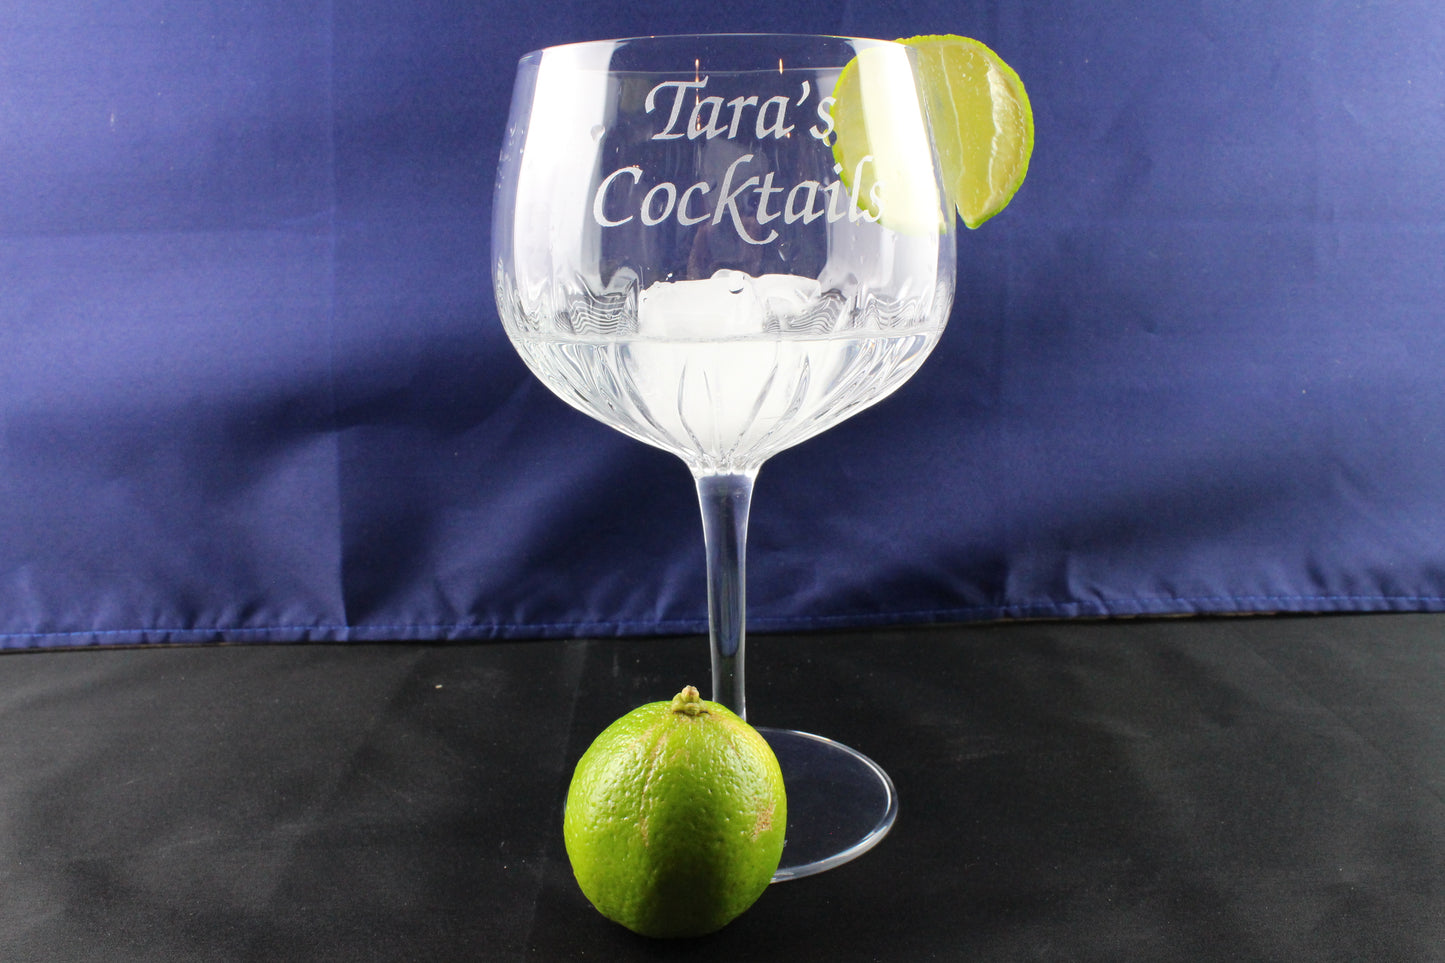 Personalised crystal cut gin glass with blue cloth background. A sliced lime is on the glass's mouth and 1 whole slime at the bottom of the glass.